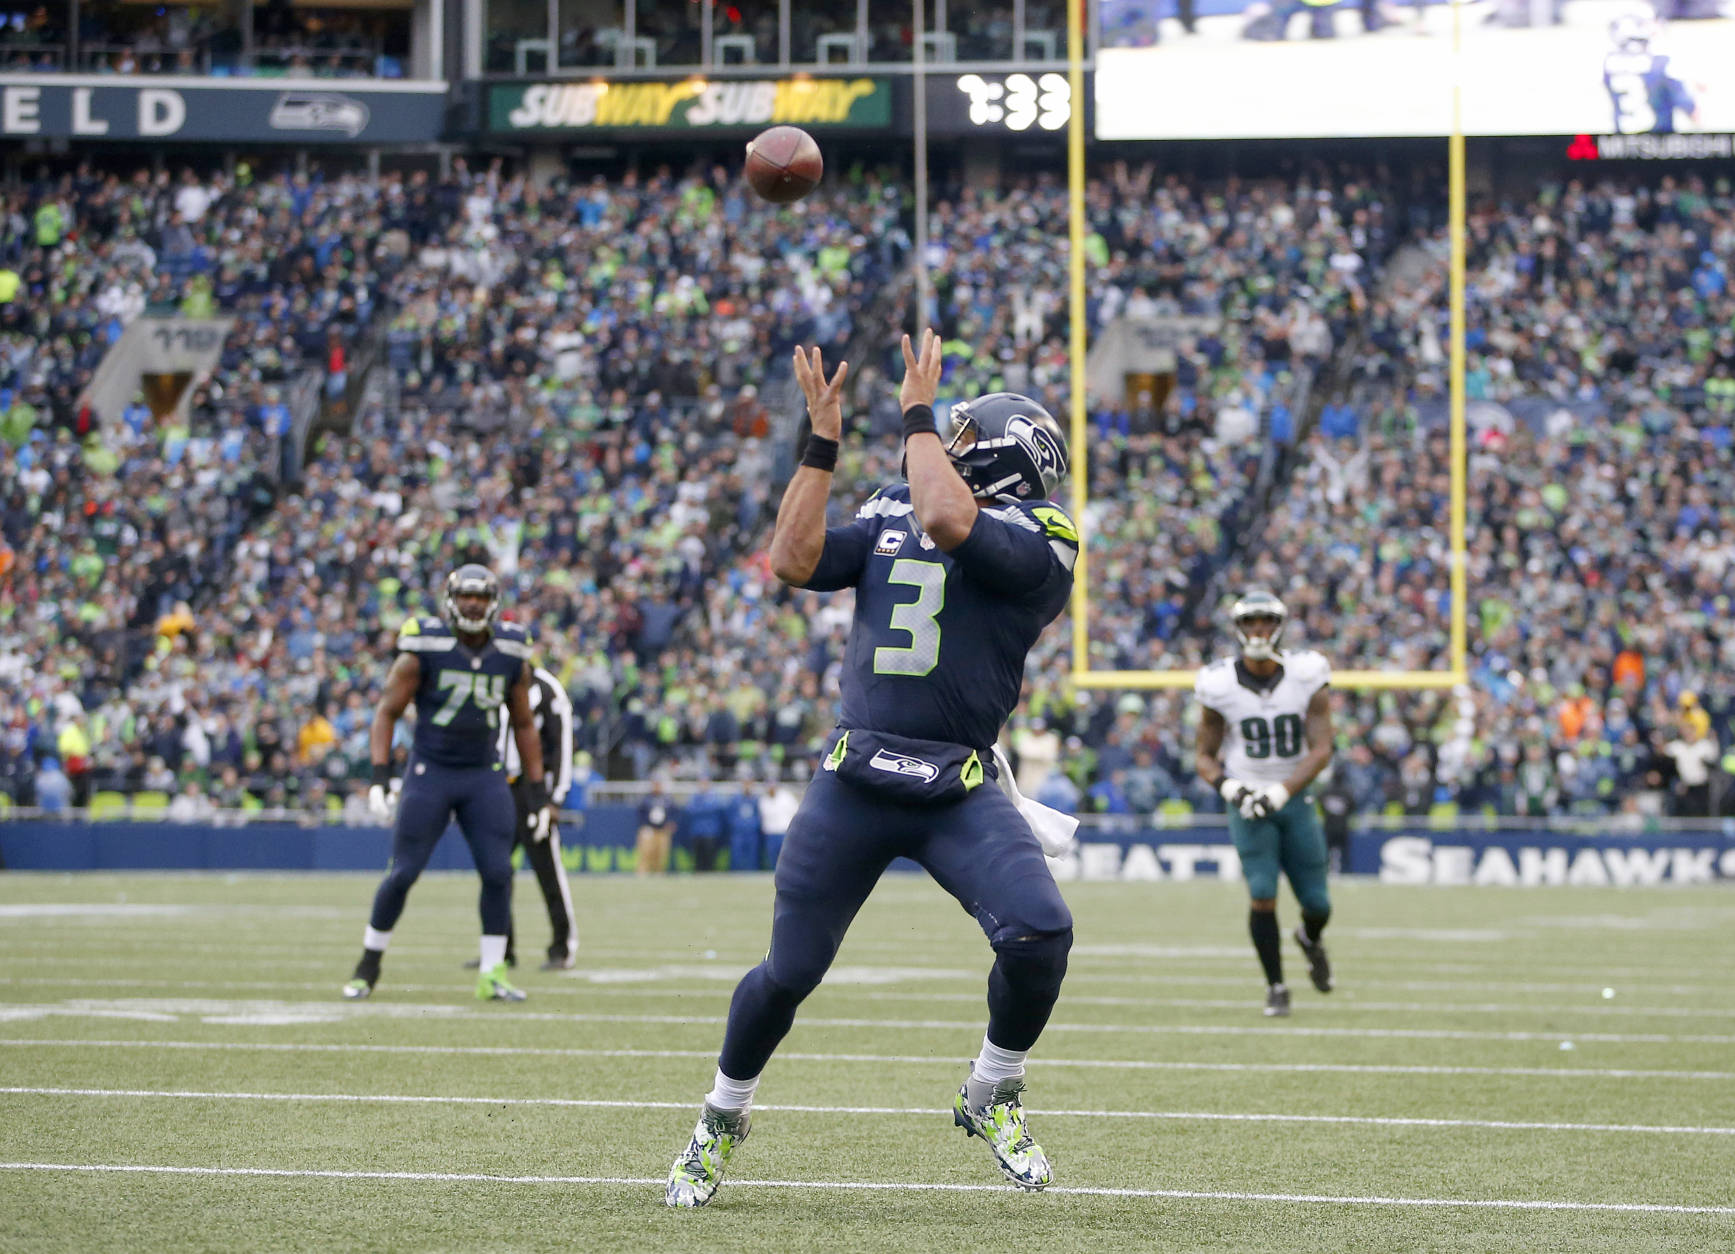 SEATTLE, WA - NOVEMBER 20:  Quarterback Russell Wilson #3 of the Seattle Seahawks scores a touchdown reception against the Philadelphia Eagles at CenturyLink Field on November 20, 2016 in Seattle, Washington.  (Photo by Otto Greule Jr/Getty Images)